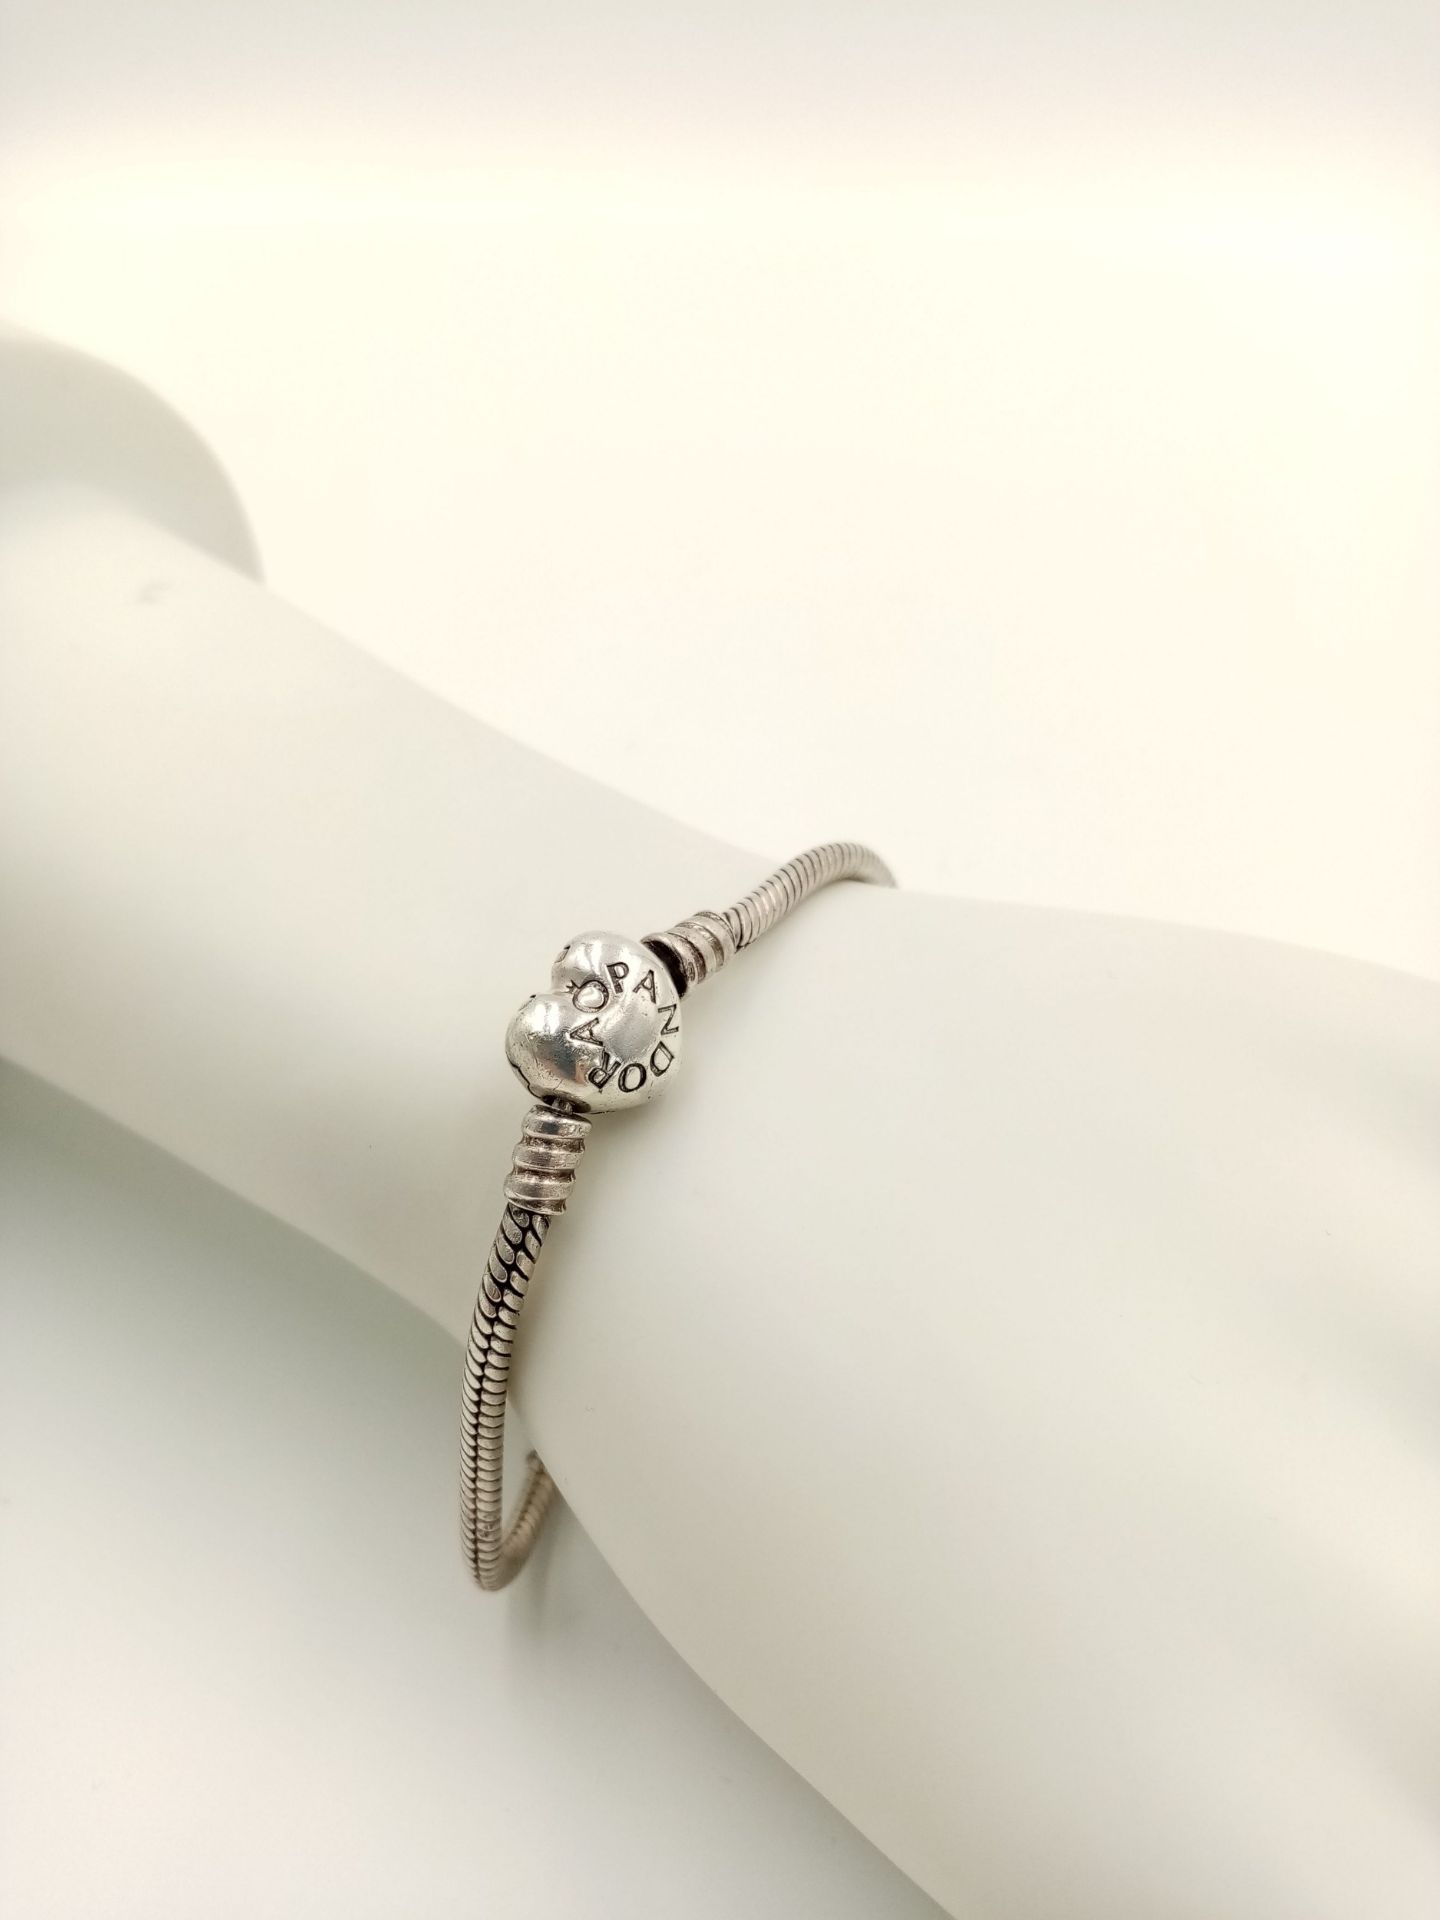 A STERLING SILVER PANDORA HEART CLASP BRACELET. 19.8cm length, 14.5g weight. Ref: SC 8121 - Image 2 of 4